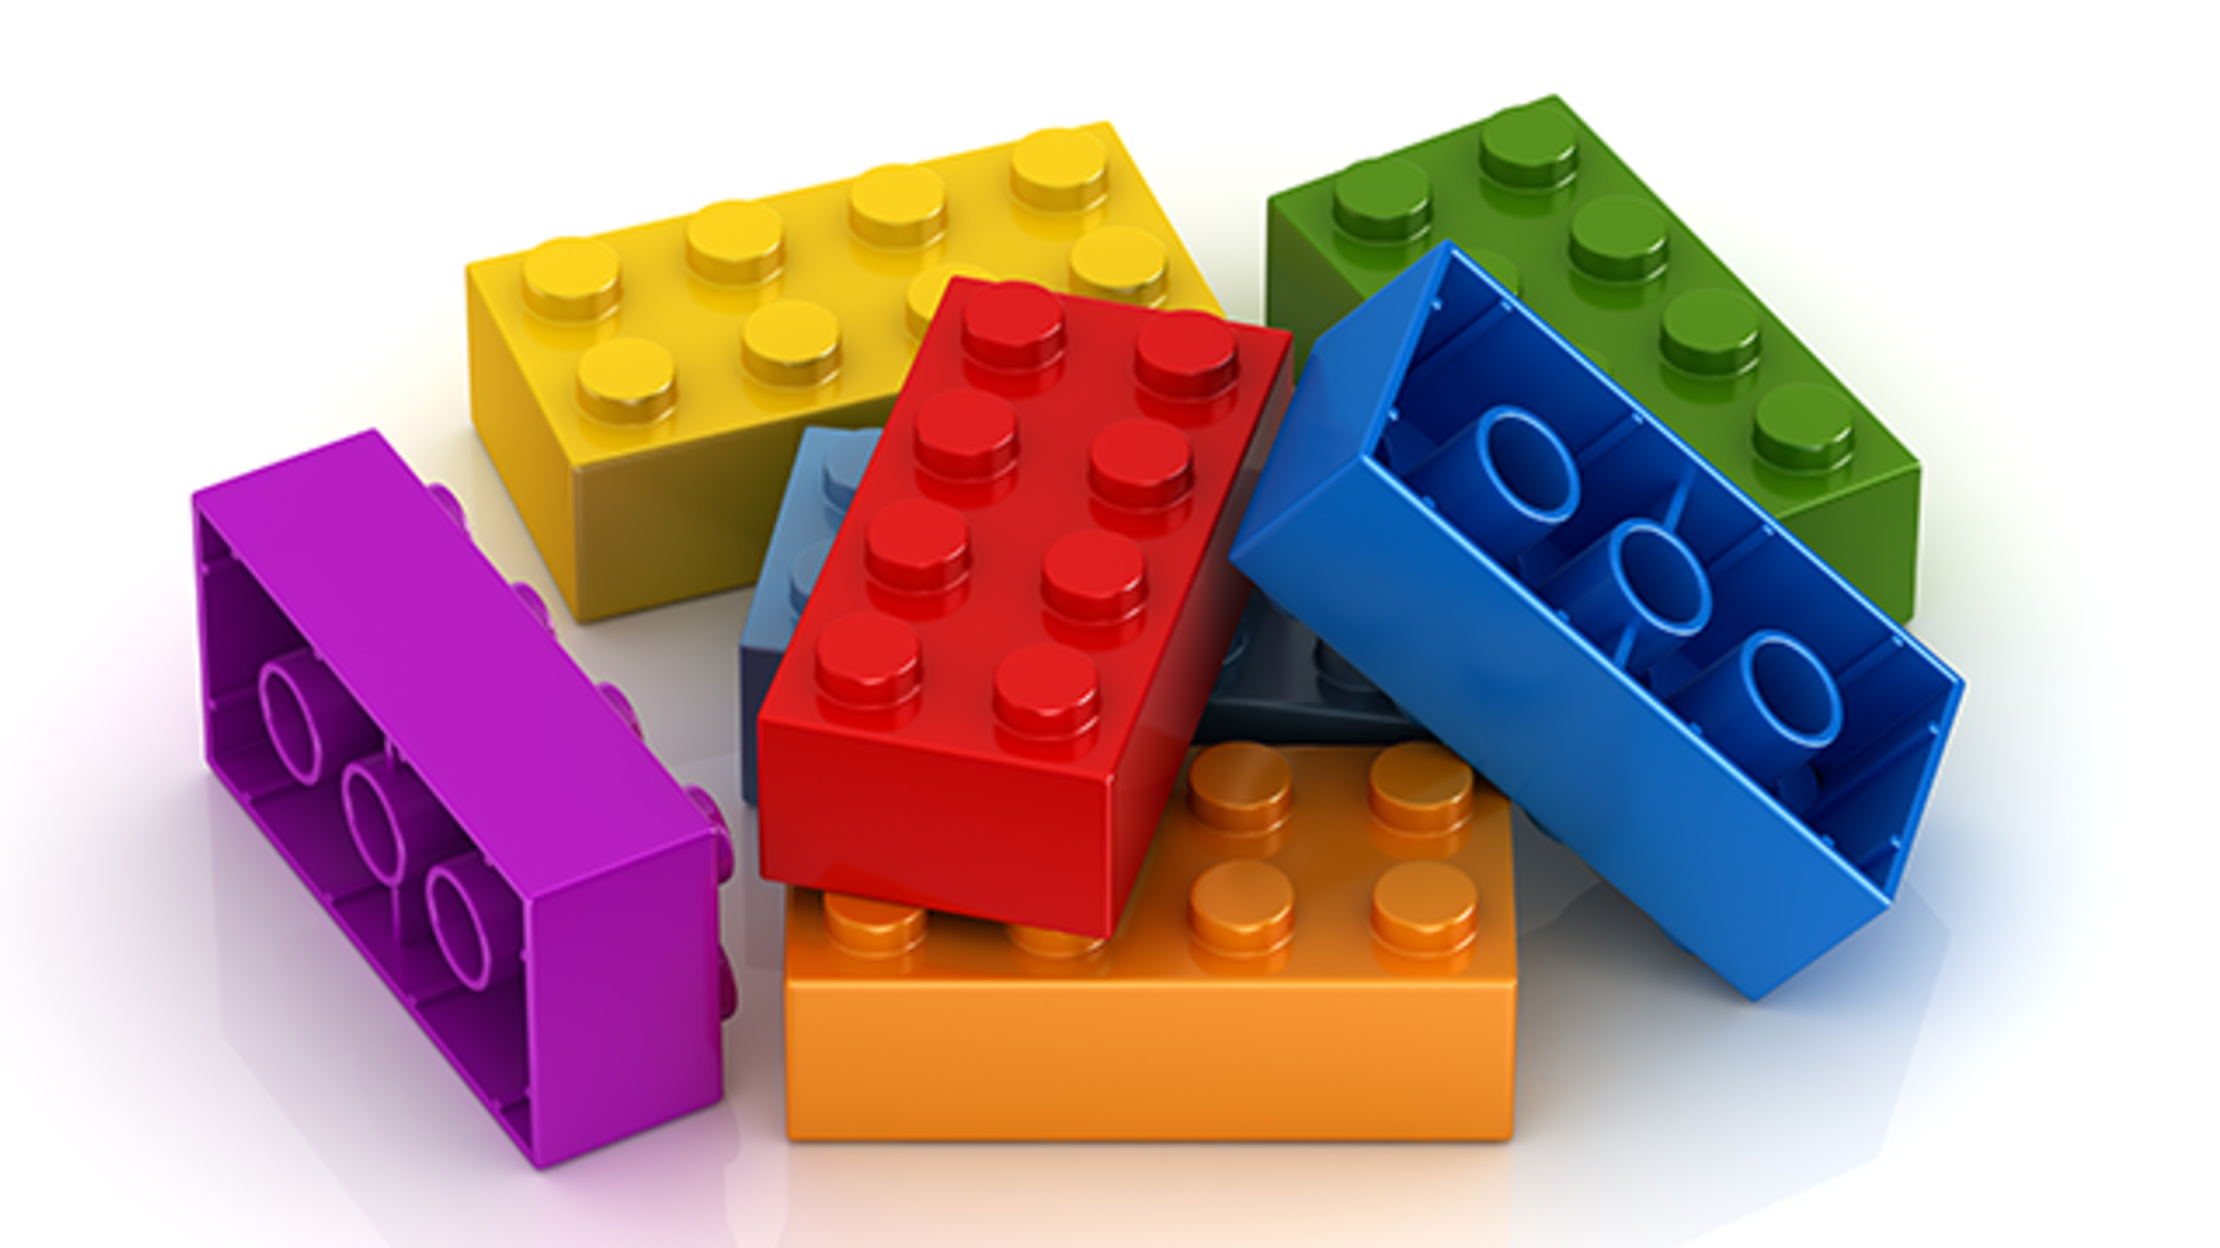 How Many Combinations Are Possible Using 6 LEGO Bricks? | Mental Floss